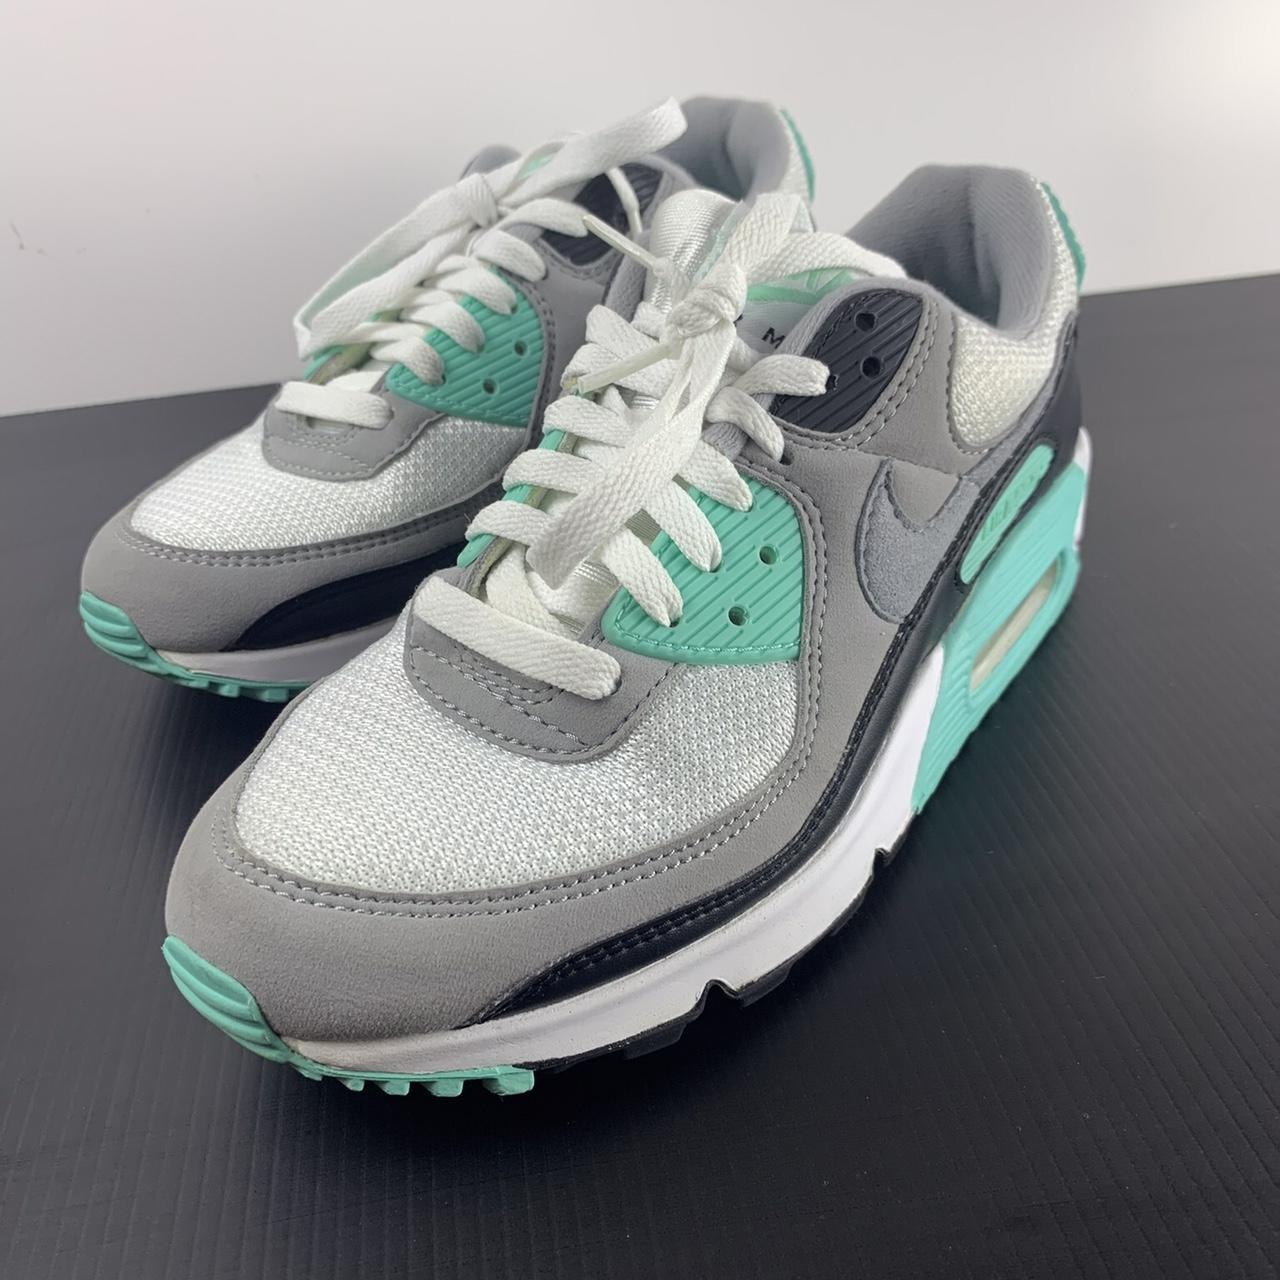 Nike Air Max 90 Recraft-Turquoise Color:... - Depop